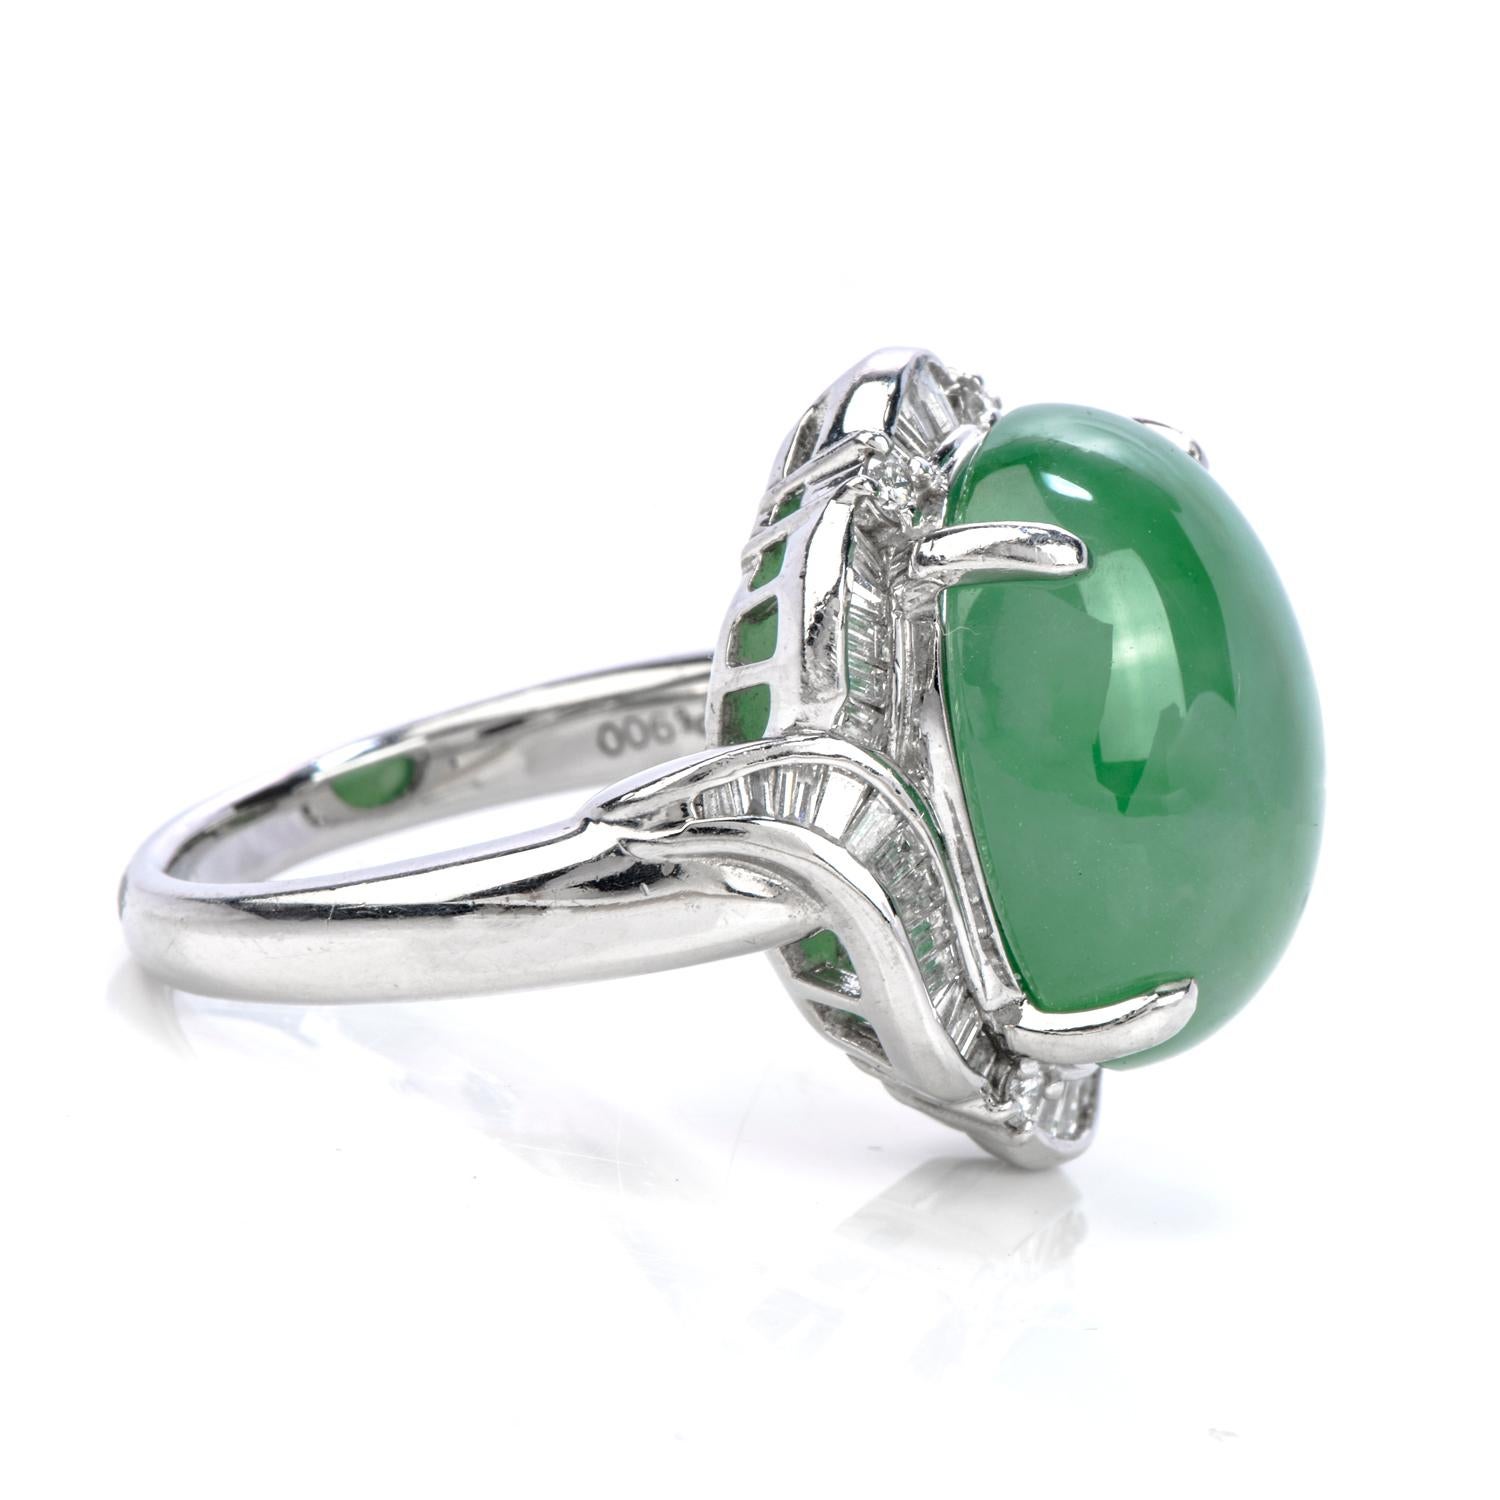 This Harvest Green natural GIA Certified Jade and Diamond Cocktail ring is crafted in luxurious Platinum.

An oval shaped genuine natural Green Jade adorns the center of this stately piece, weighing appx. 15.76 carats. Contrasting it's shape are